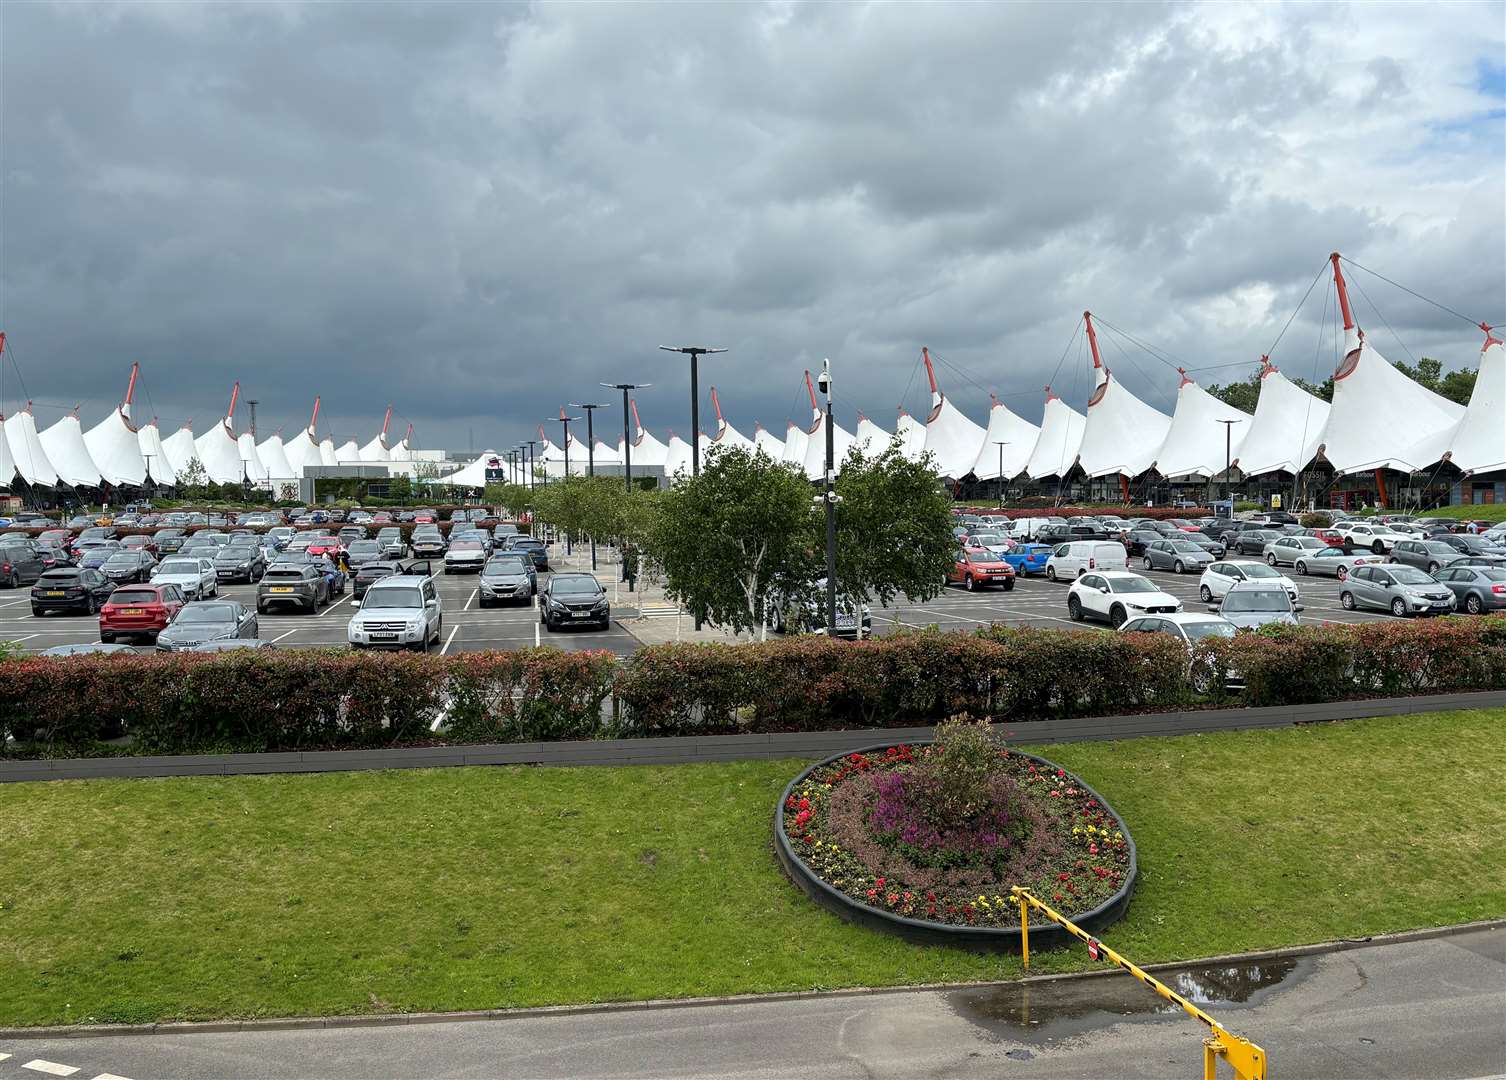 New parking charges have been introduced at Ashford Designer Outlet, sparking anger among shoppers